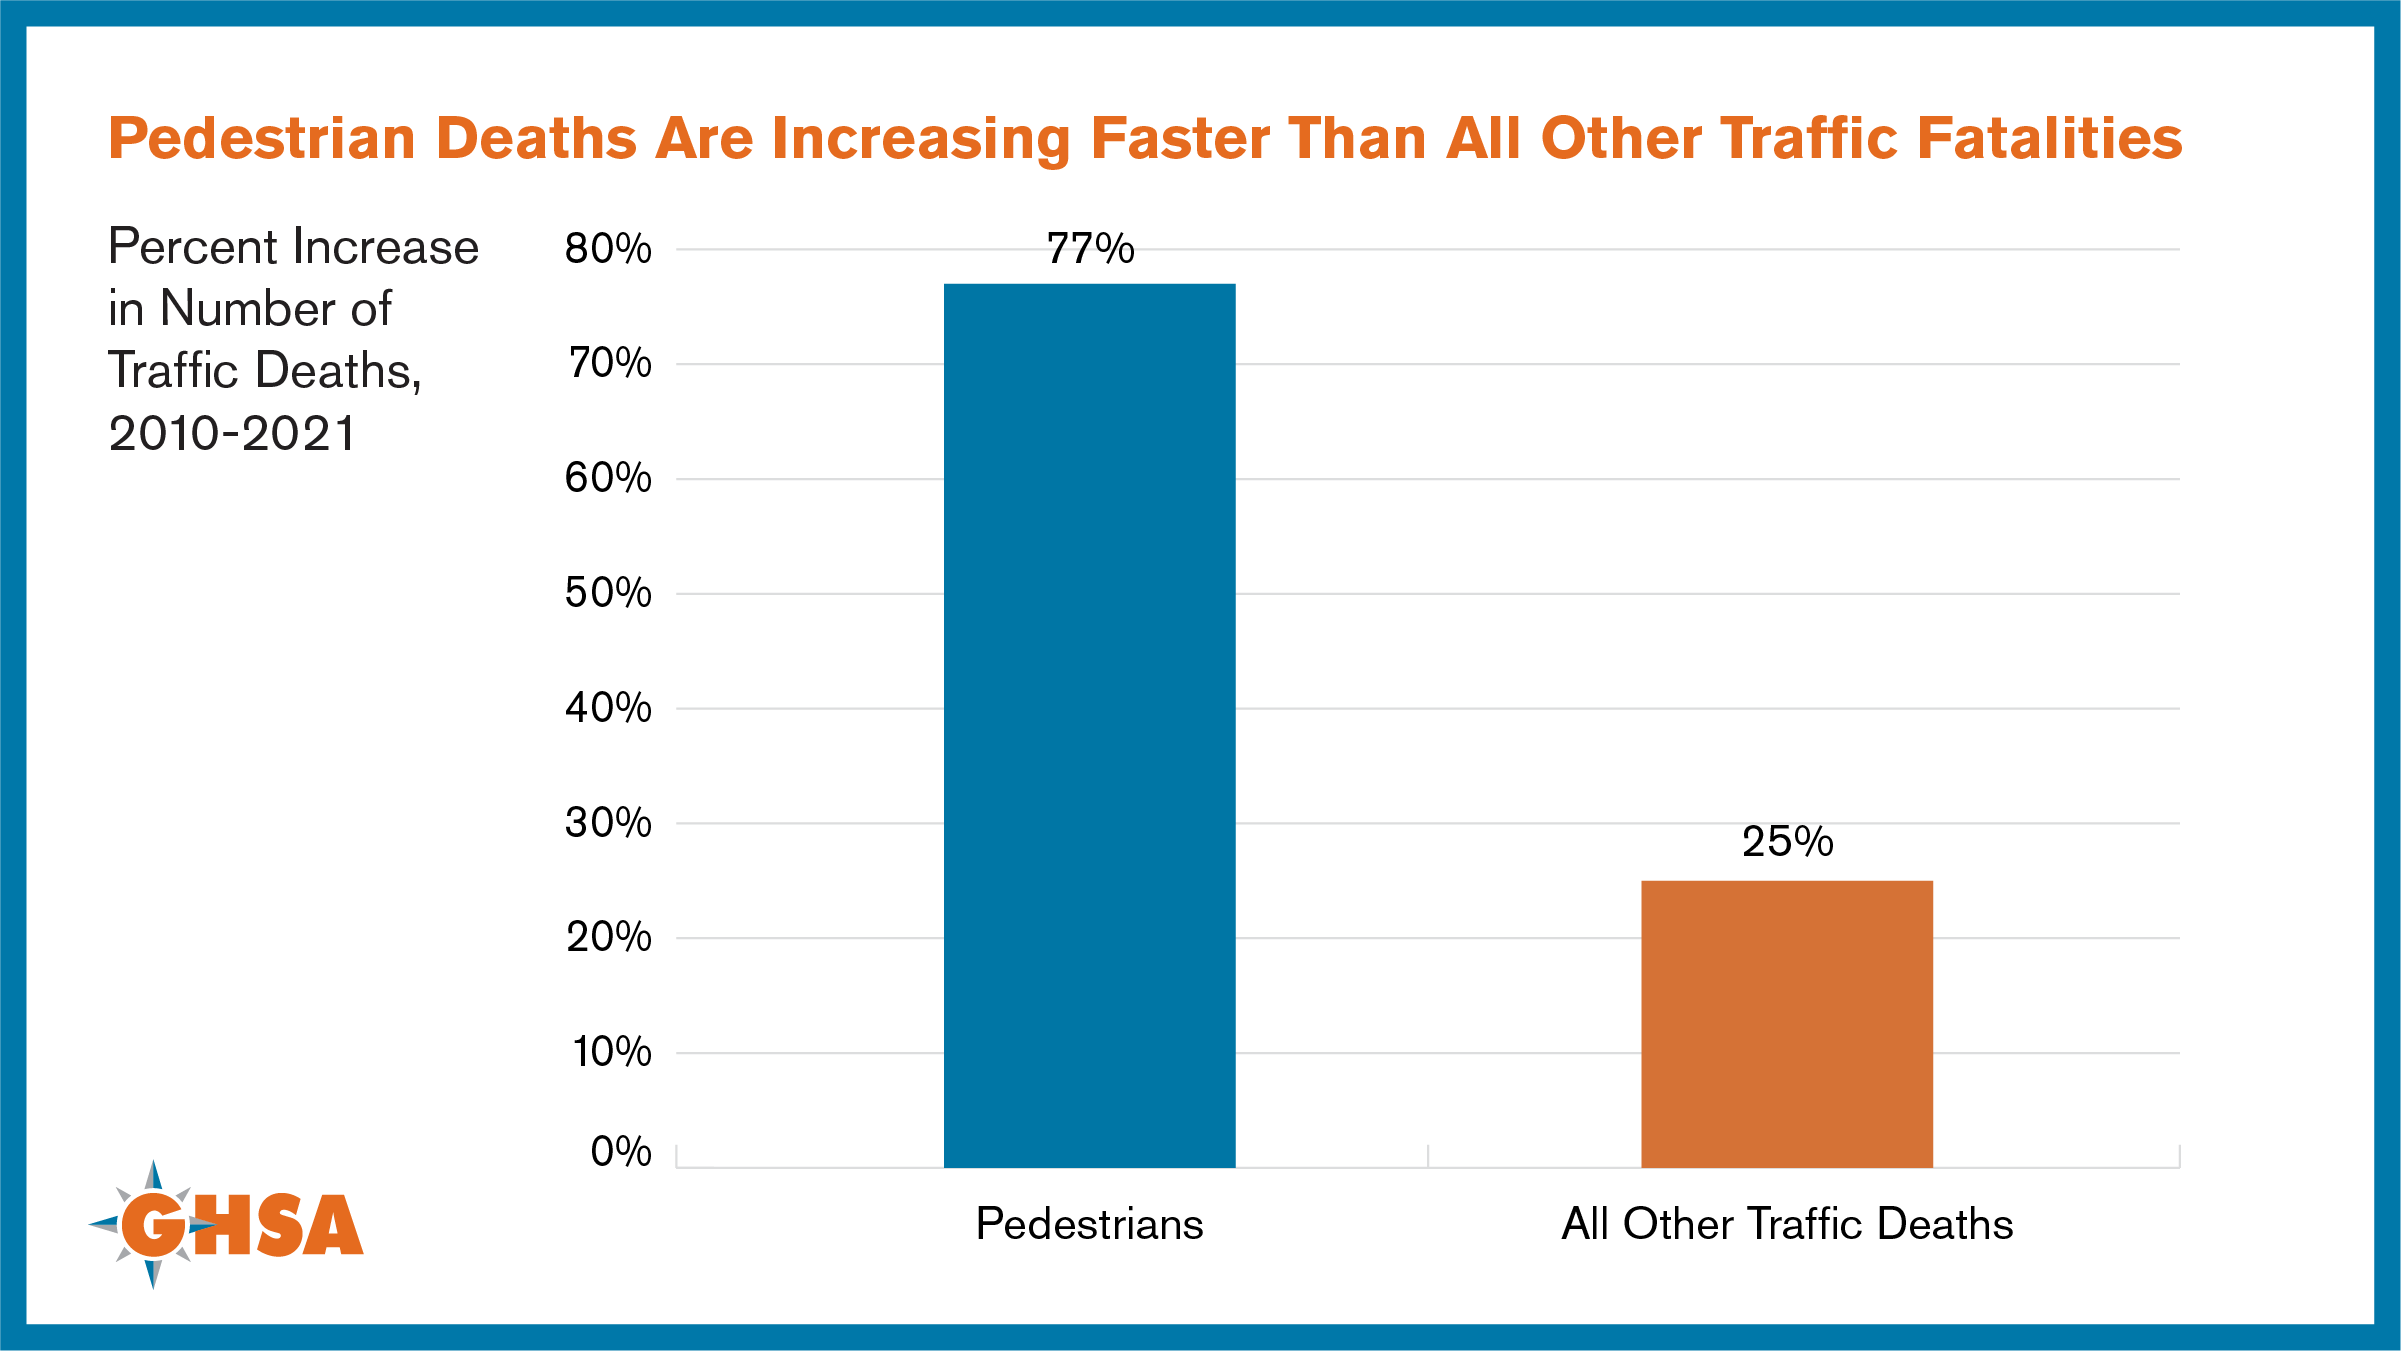 Pedestrian Deaths Are Increasing Faster Than All Other Traffic Fatalities